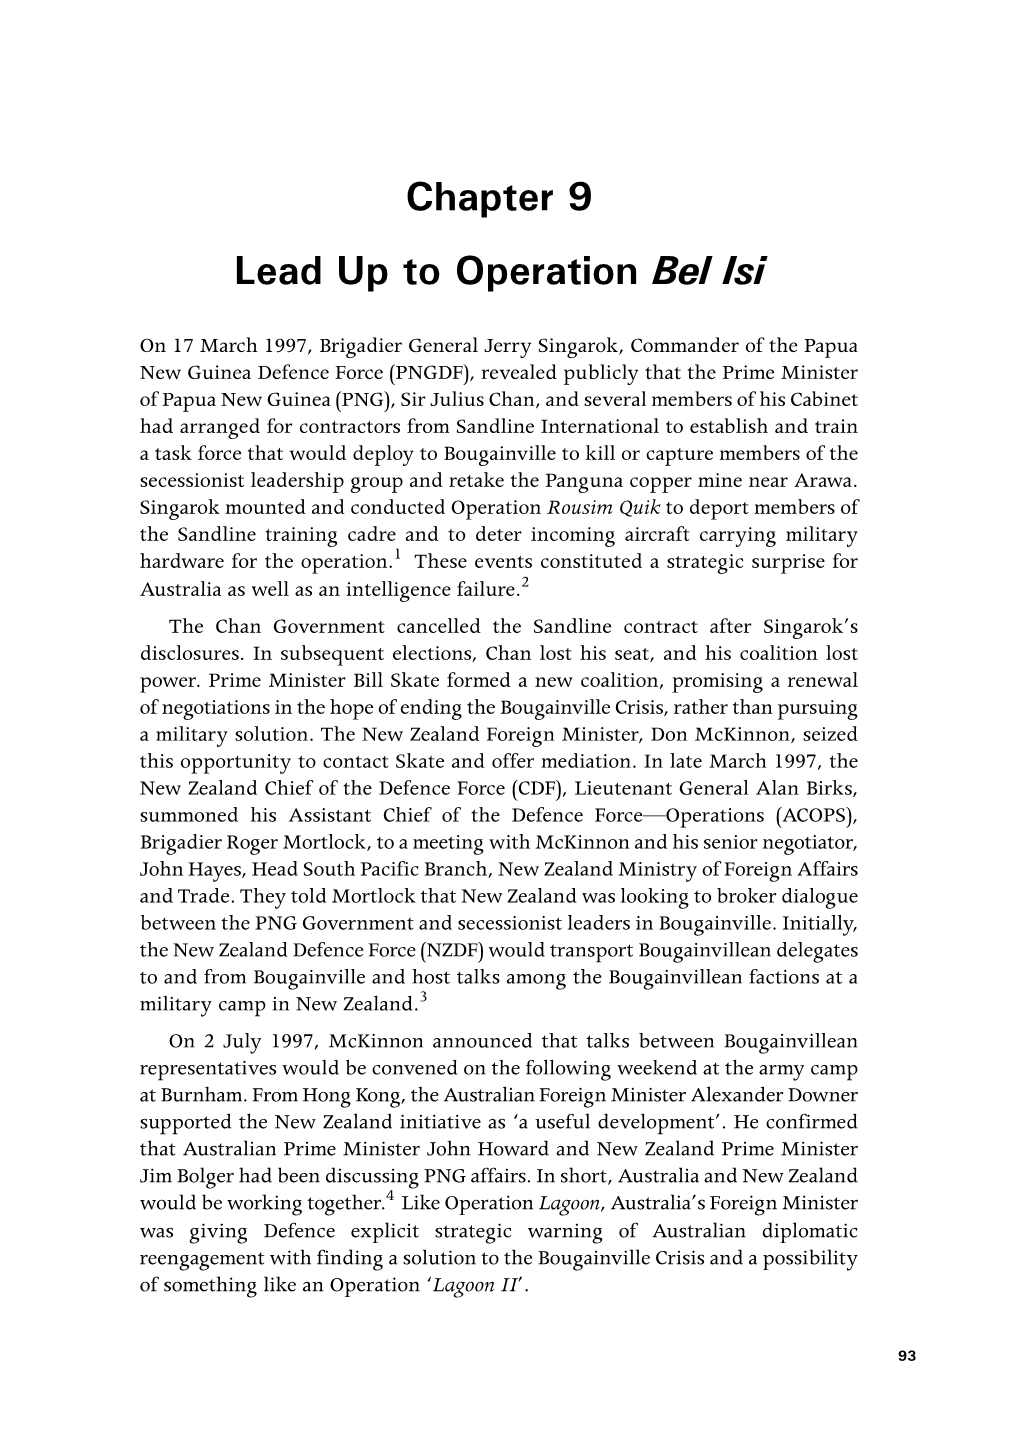 Lead up to Operation Bel Isi